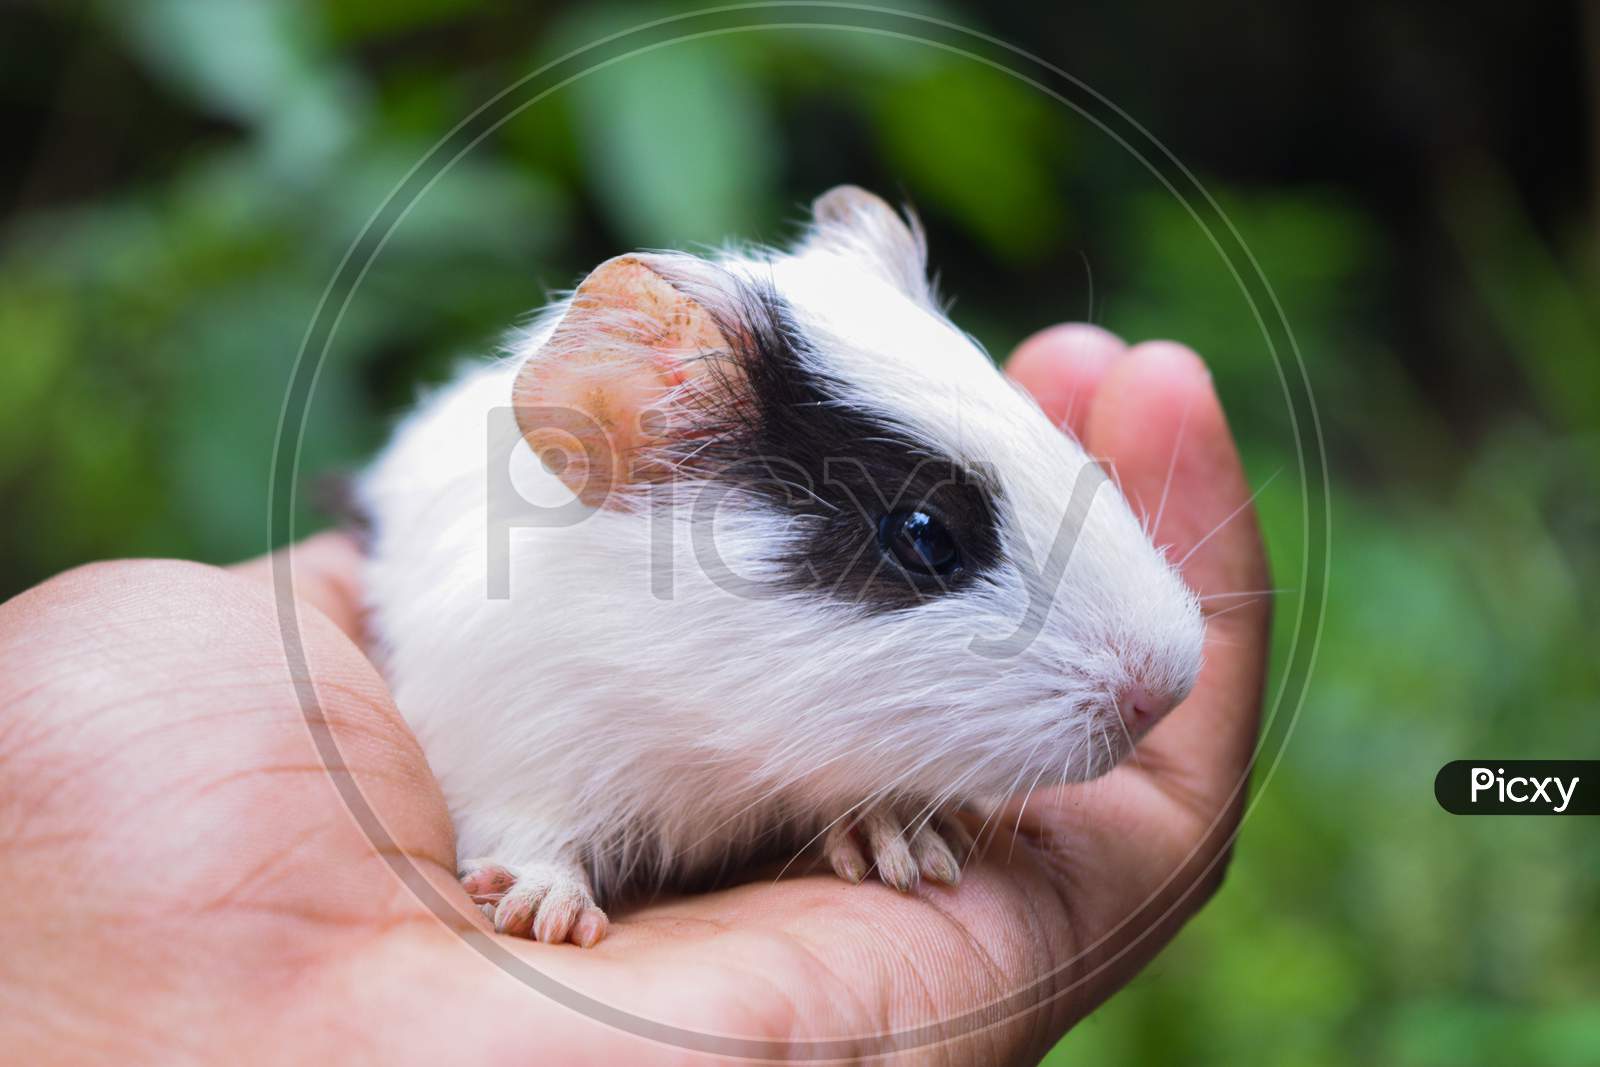 A cute black and white guinea pig on hand in the morning during winter